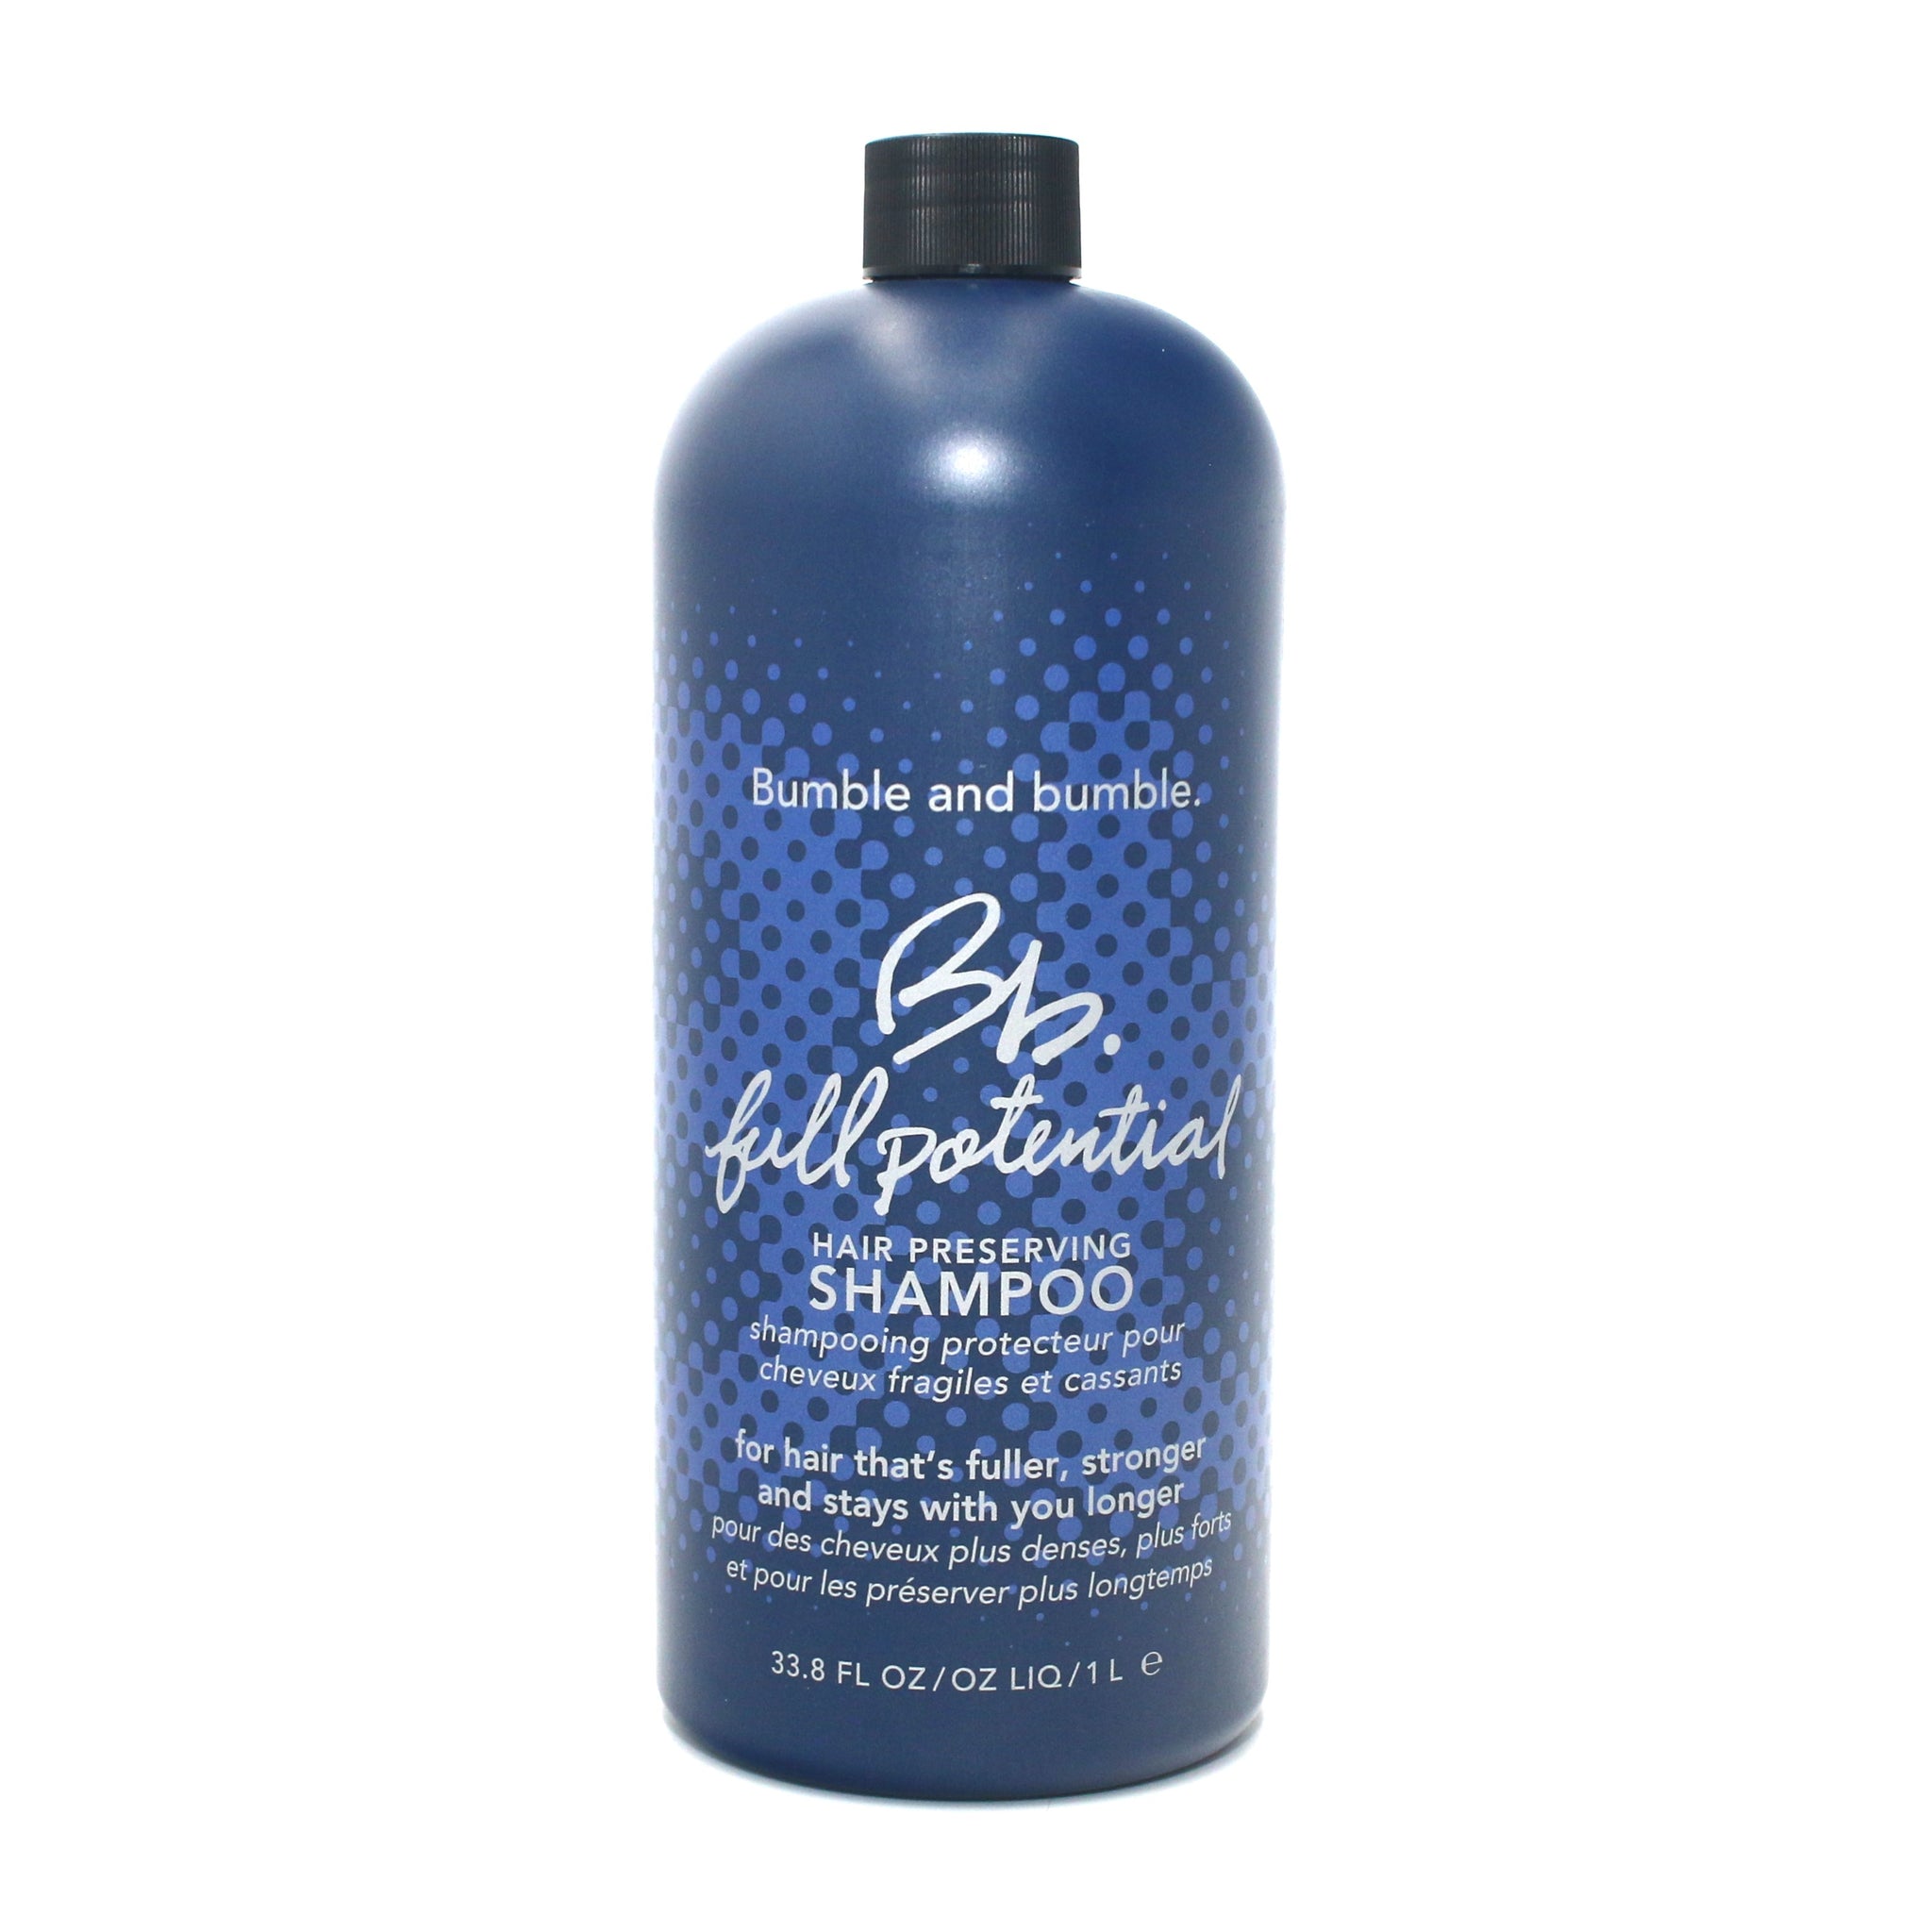 Bumble and Bumble Bb Full Potential Hair Preserving Shampoo 33.8 oz